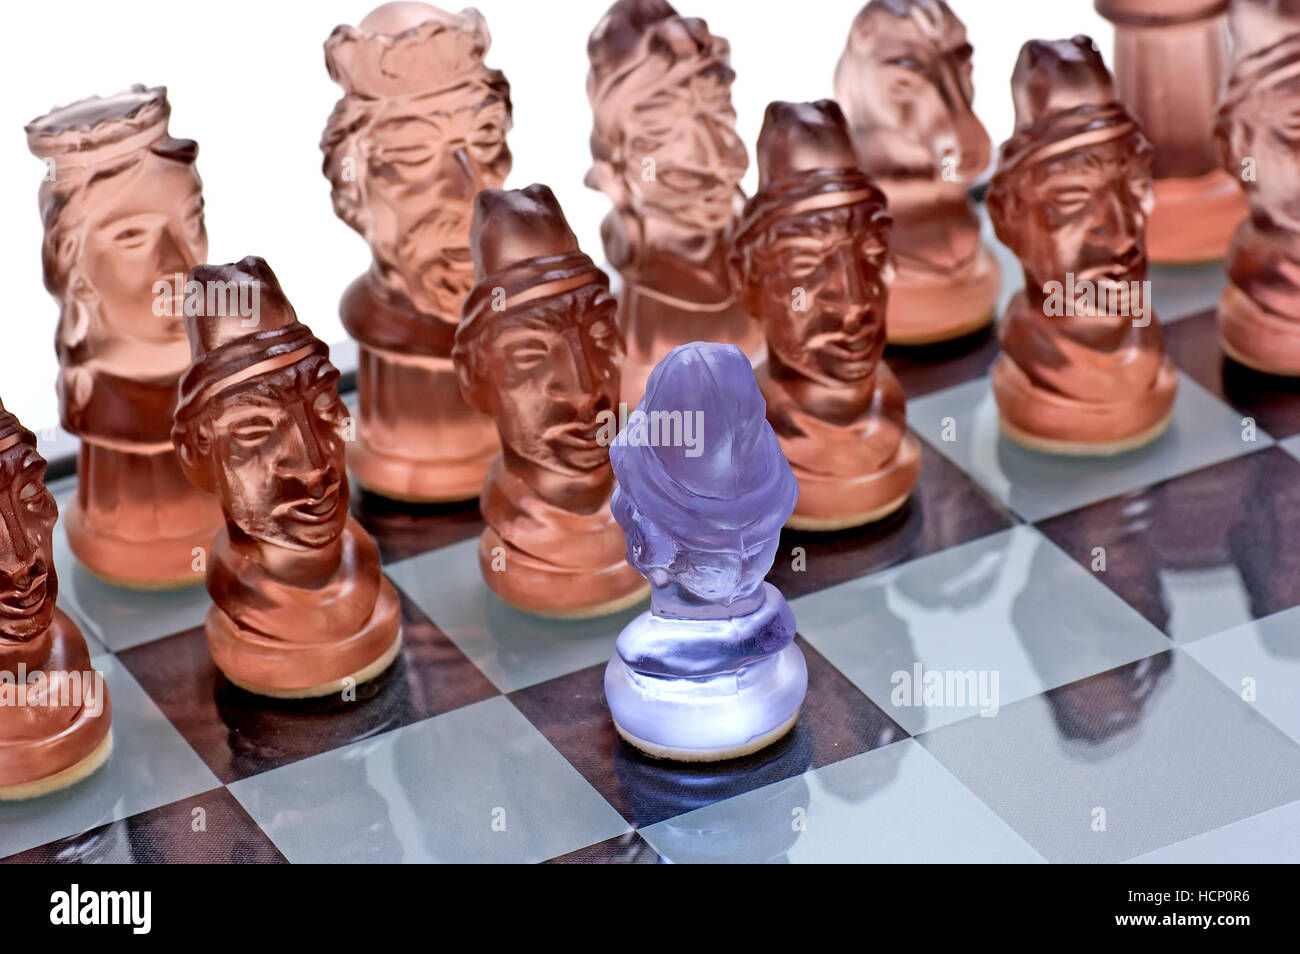 White pawn againts black pieces on glass made chess board Stock Photo